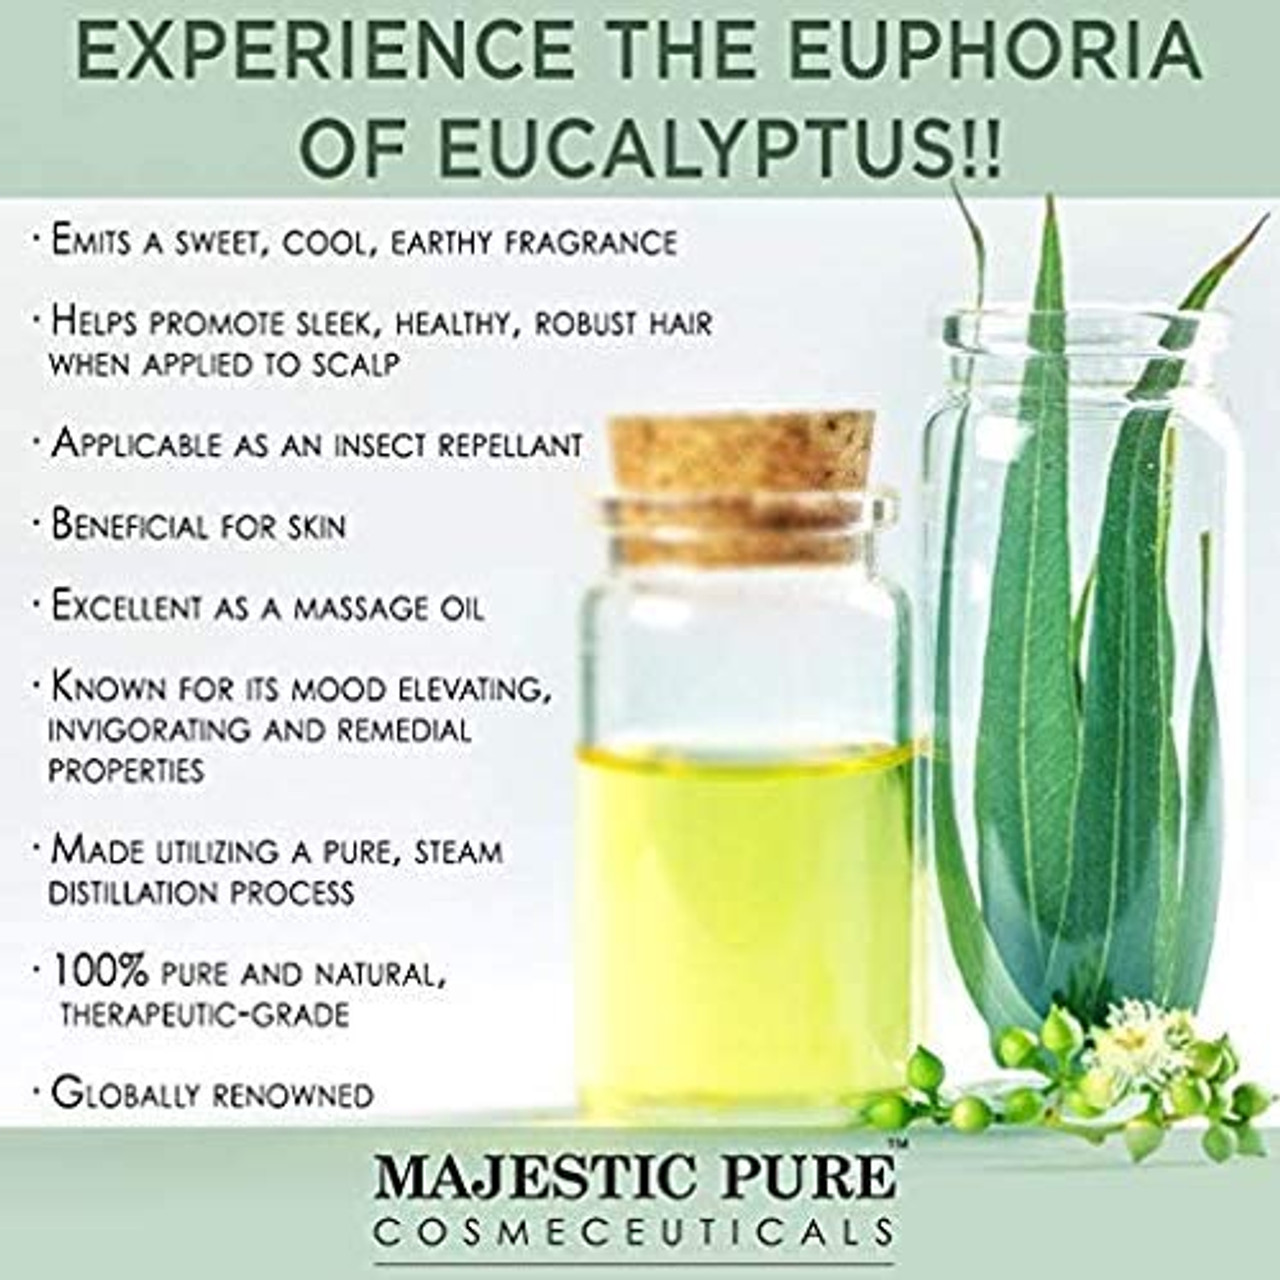 Majestic Pure Helichrysum Essential Oil, Therapeutic Grade, Pure and Natural, for Aromatherapy, Massage, Topical & Household Uses, 1 fl oz